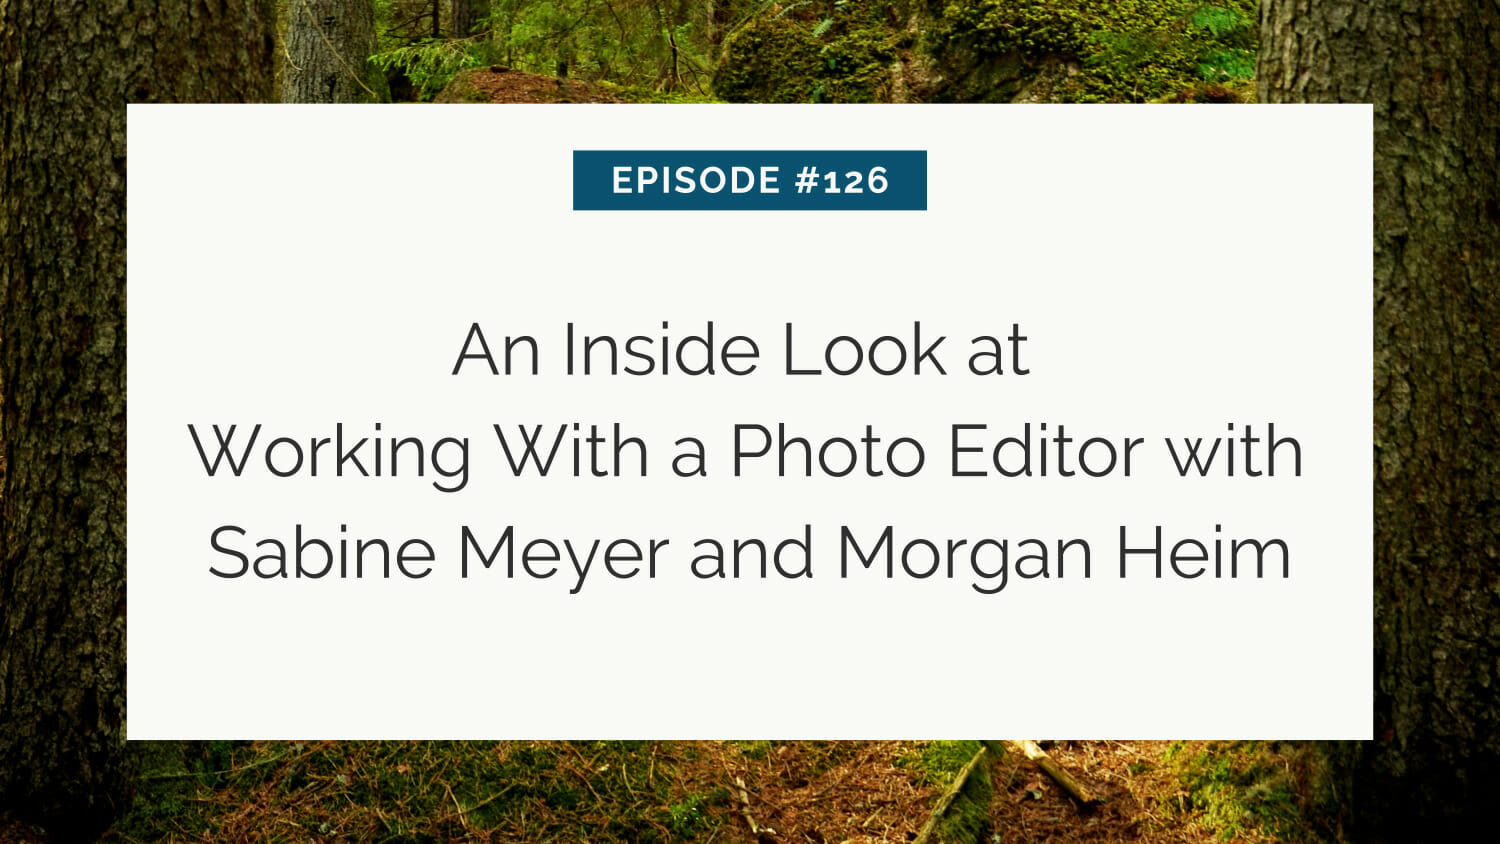 Title slide for a podcast episode #126 about working with a photo editor, featuring sabine meyer and morgan heim, set against a forest background.